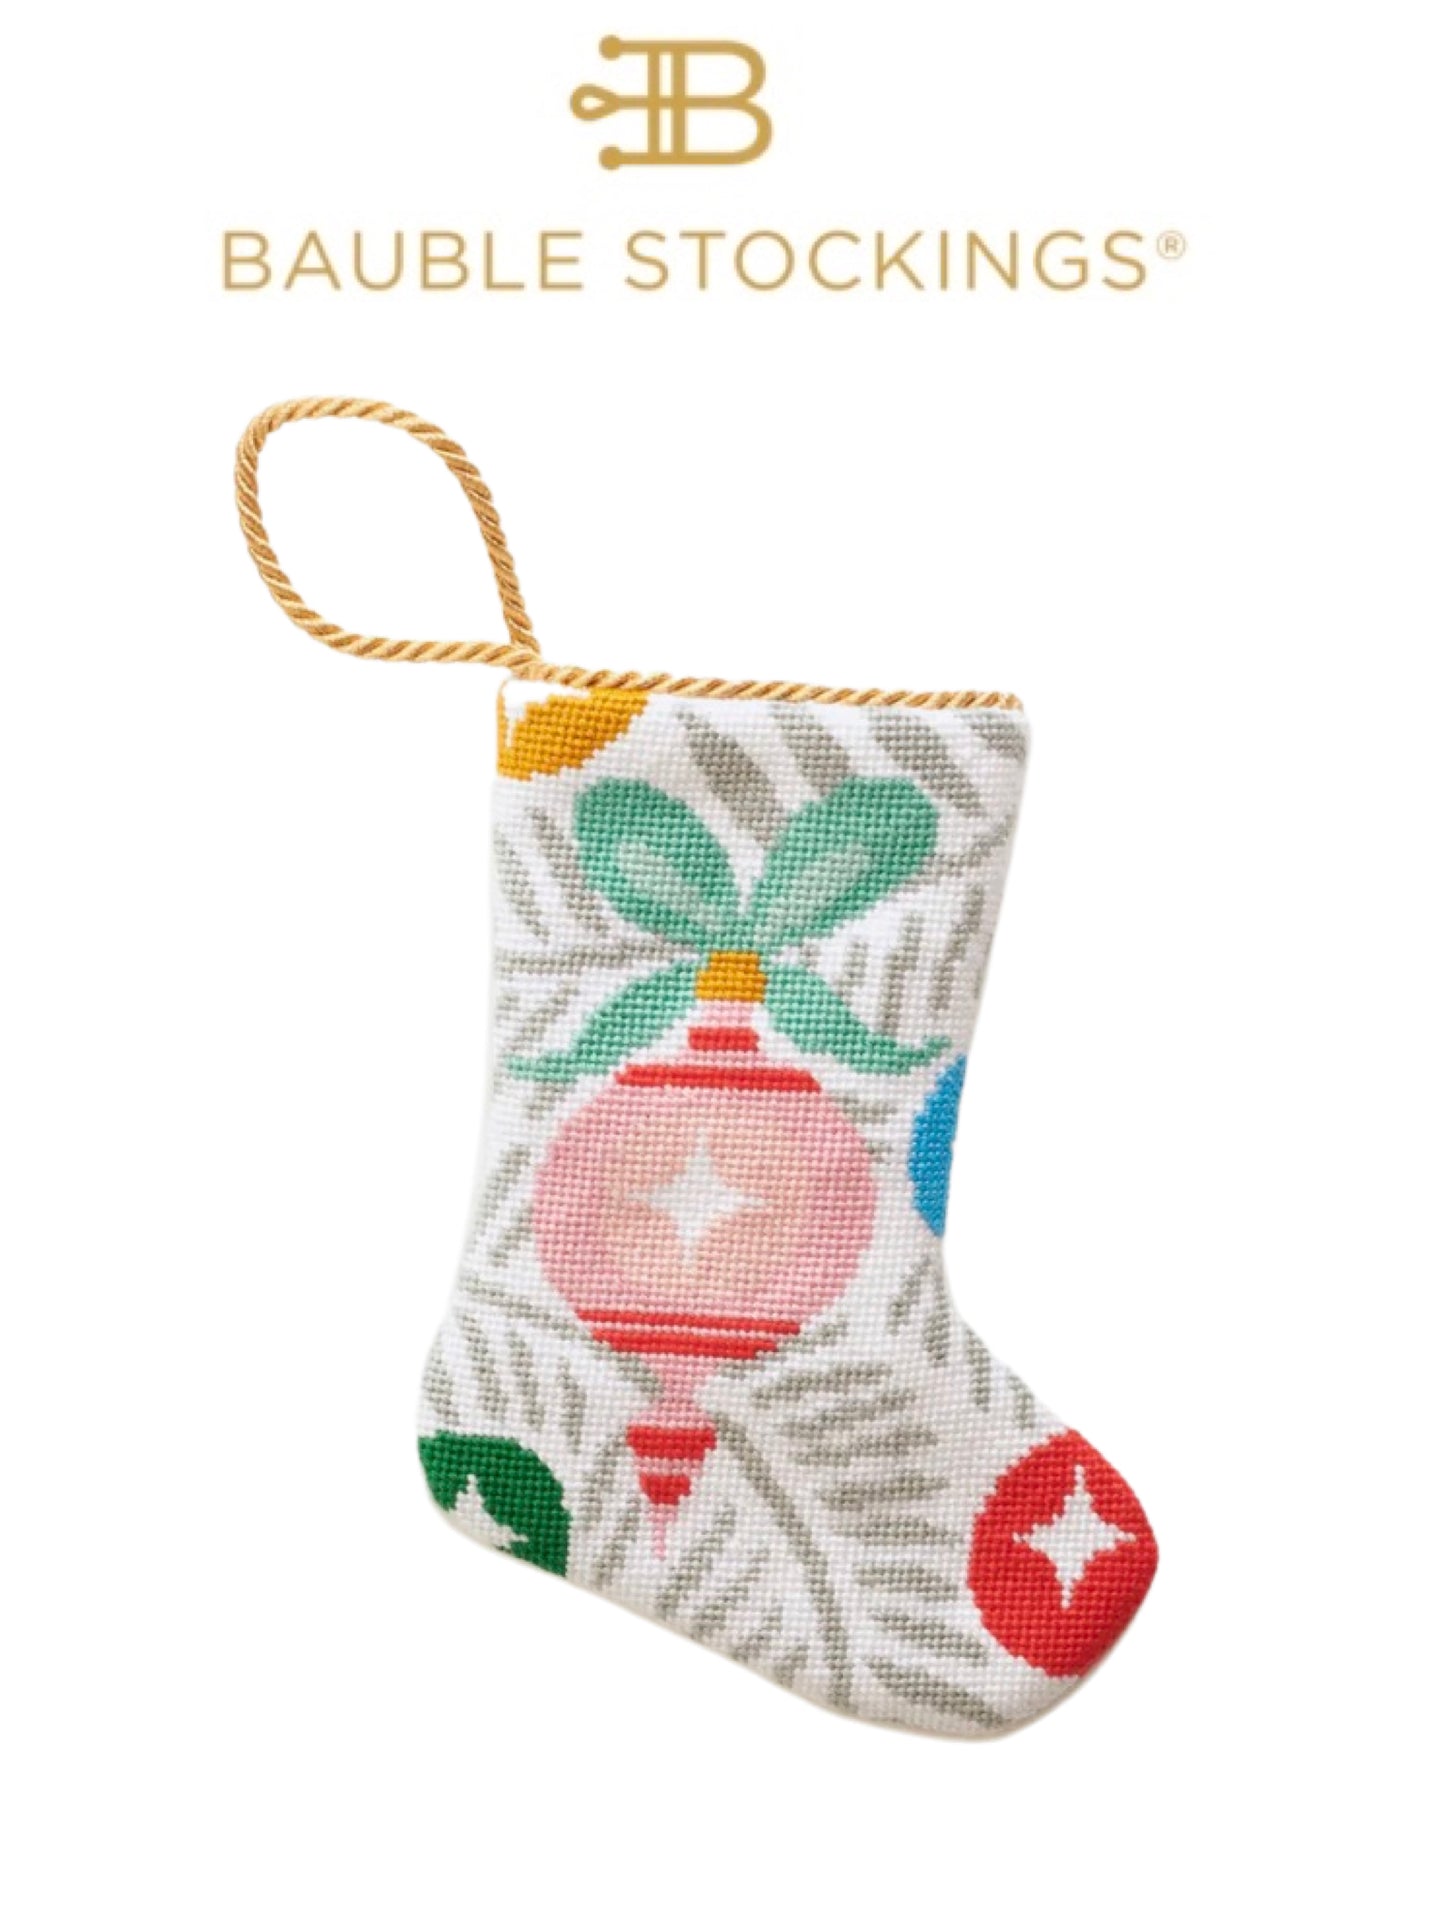 Bauble Stockings: now in store!